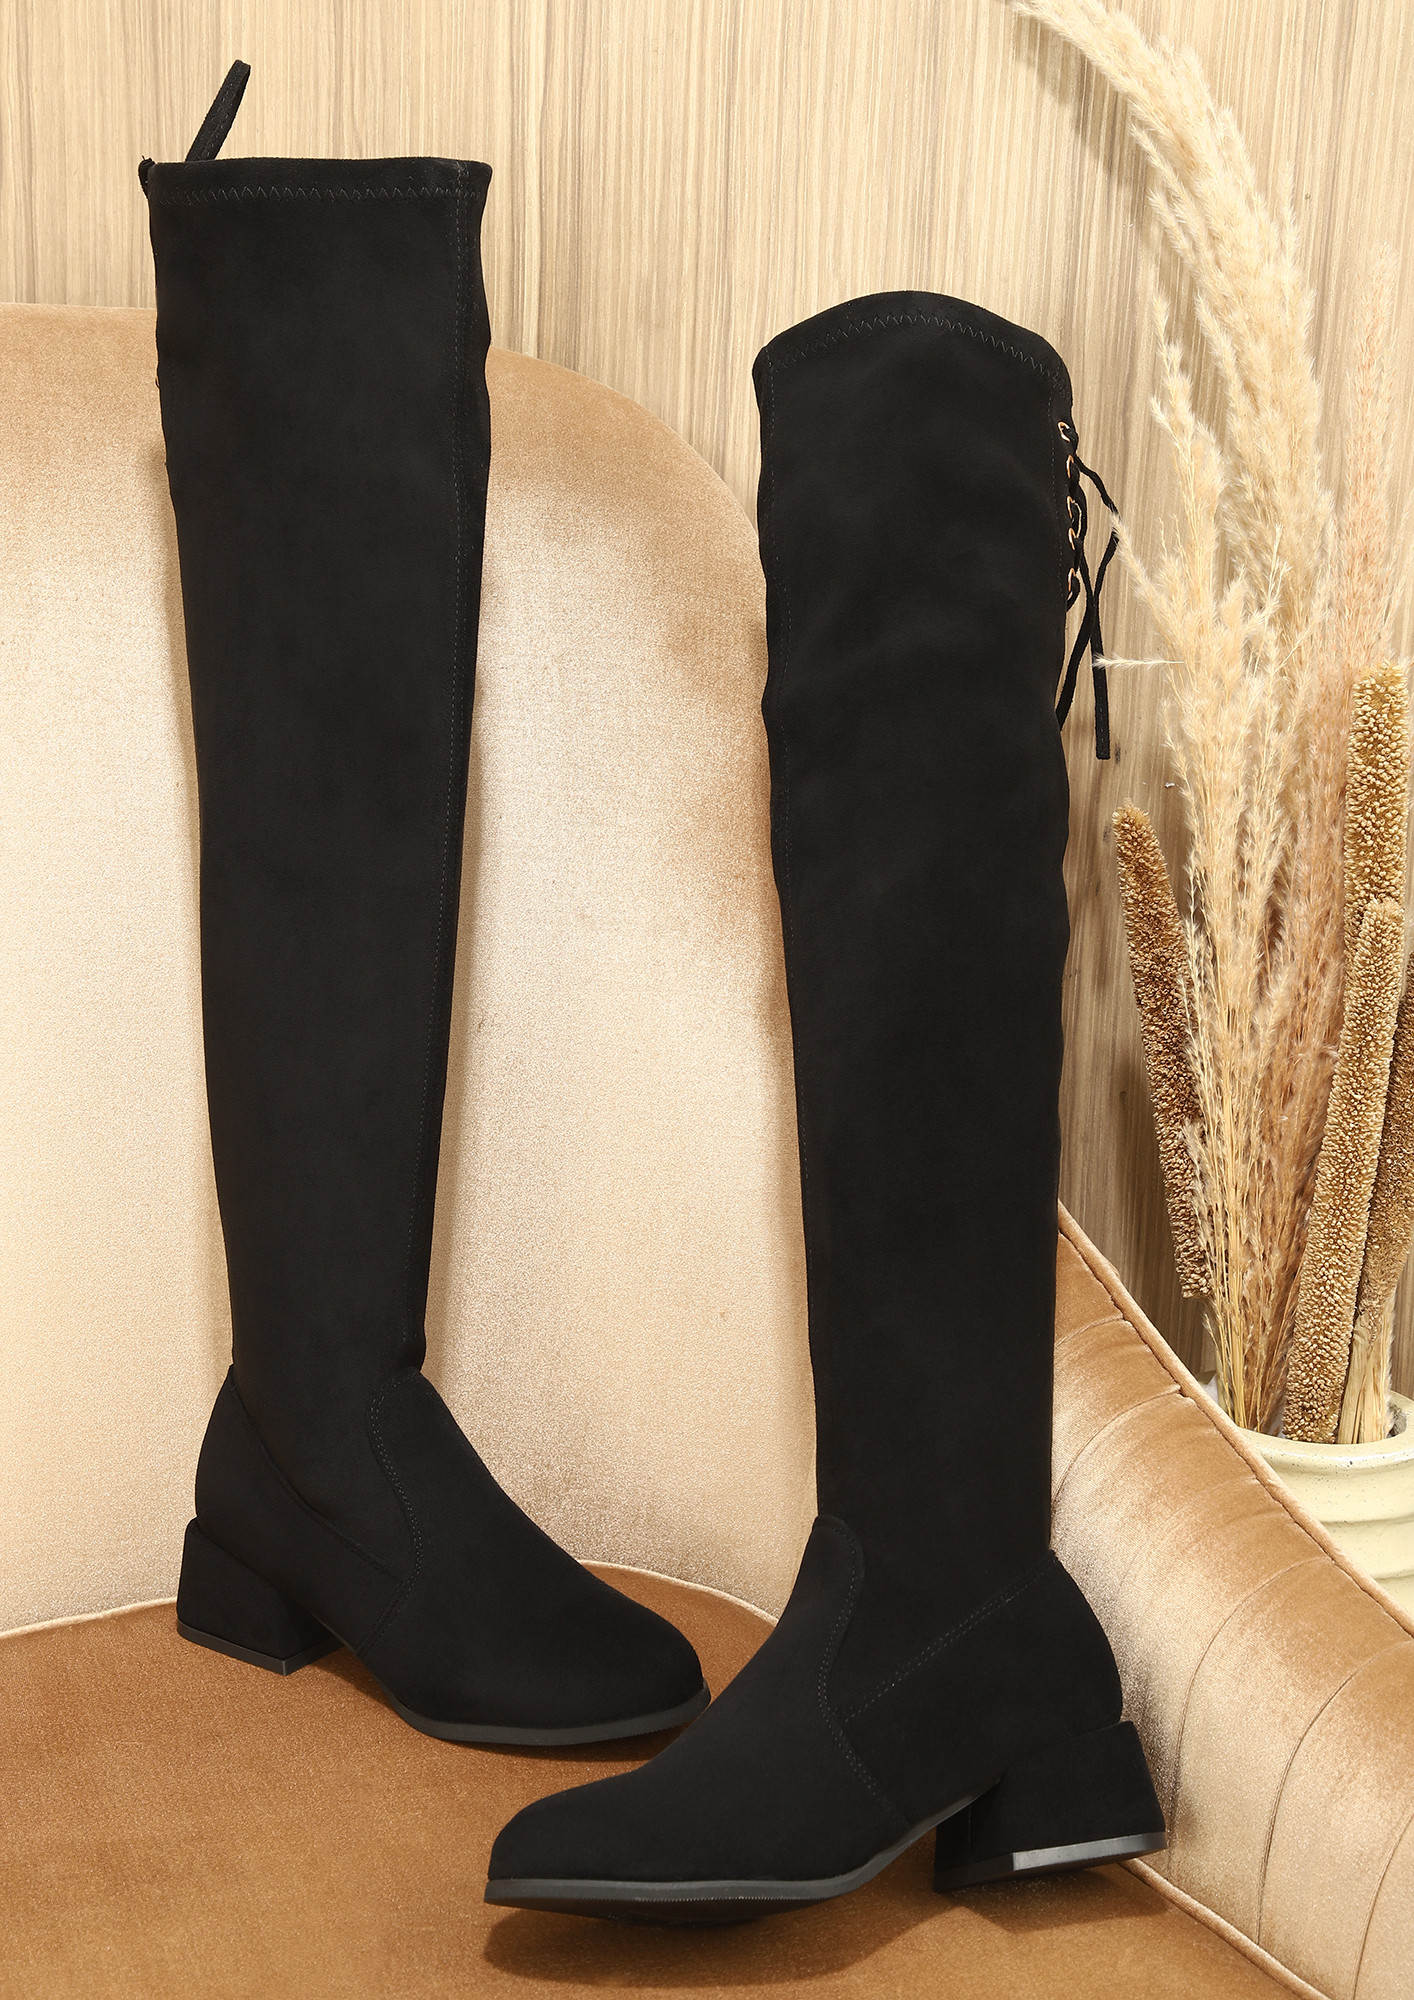 LOW HEEL BLACK FAUX LEATHER ABOVE KNEE BOOTS